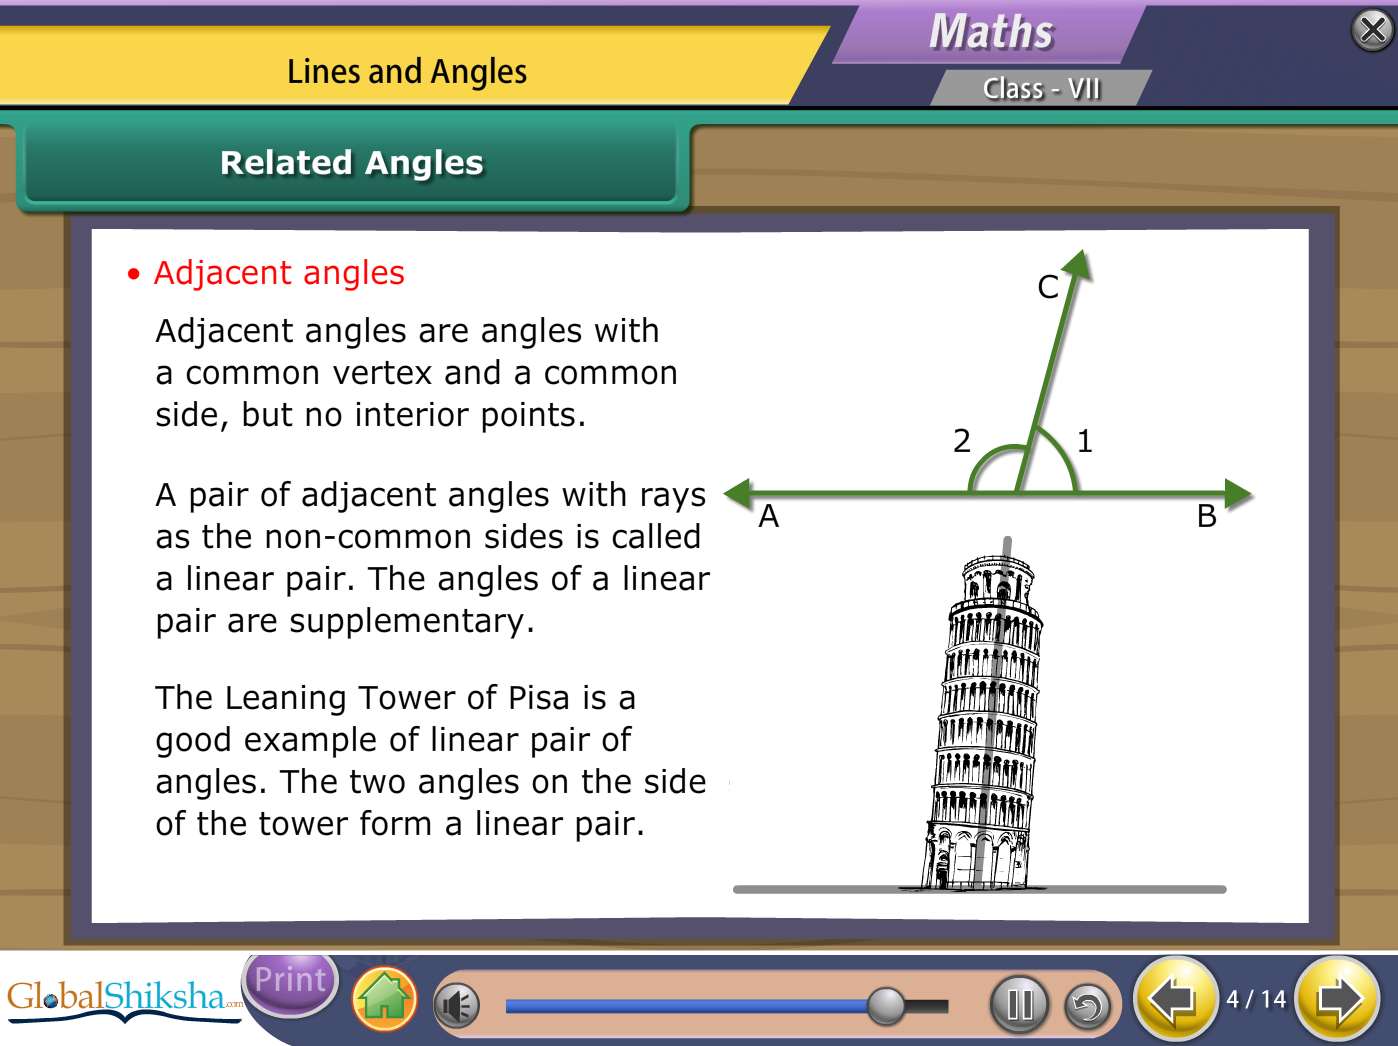 Maharashtra State Board Class 7 Maths & Science Animated Pendrive in English